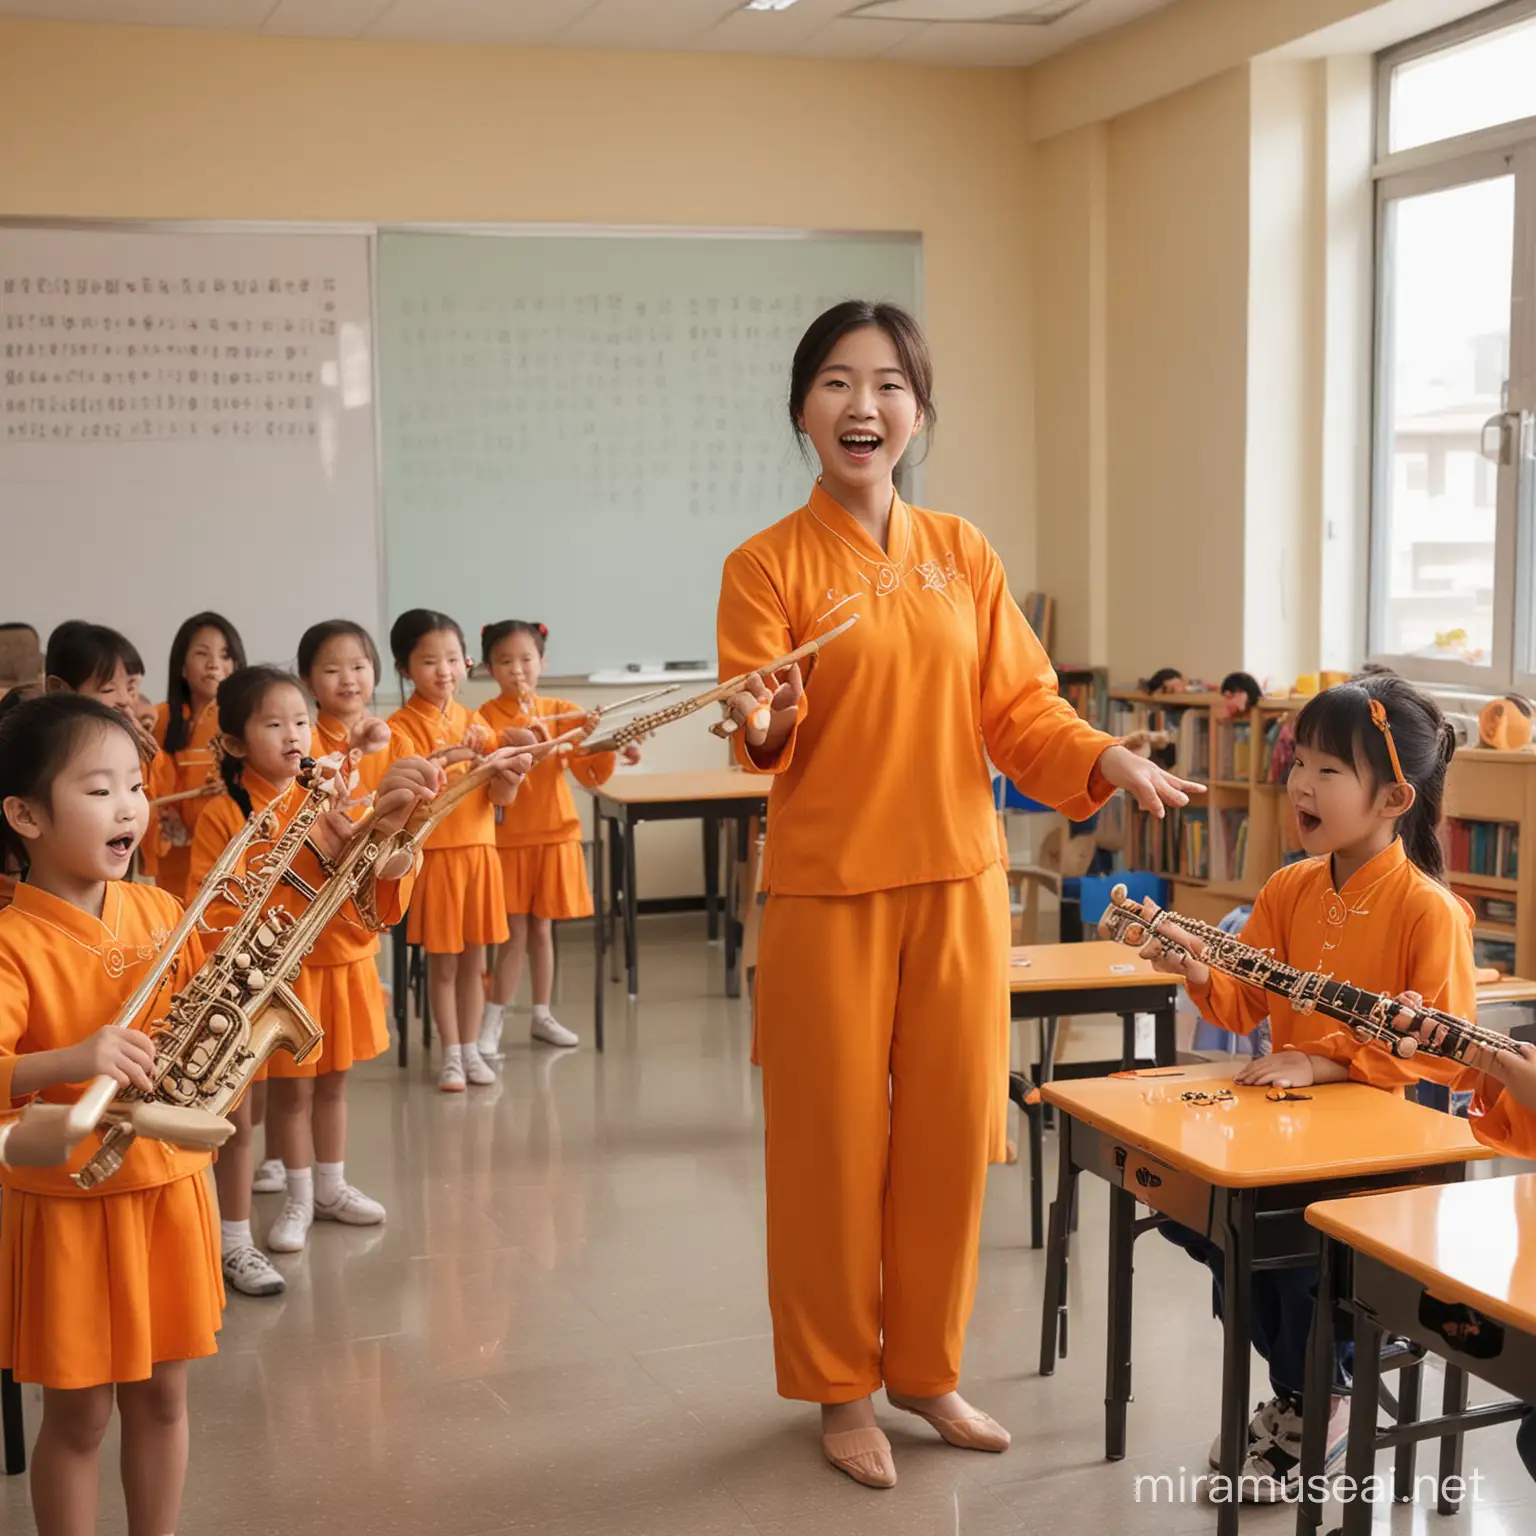 Vibrant Music Class Chinese Children Playing Instruments and Singing